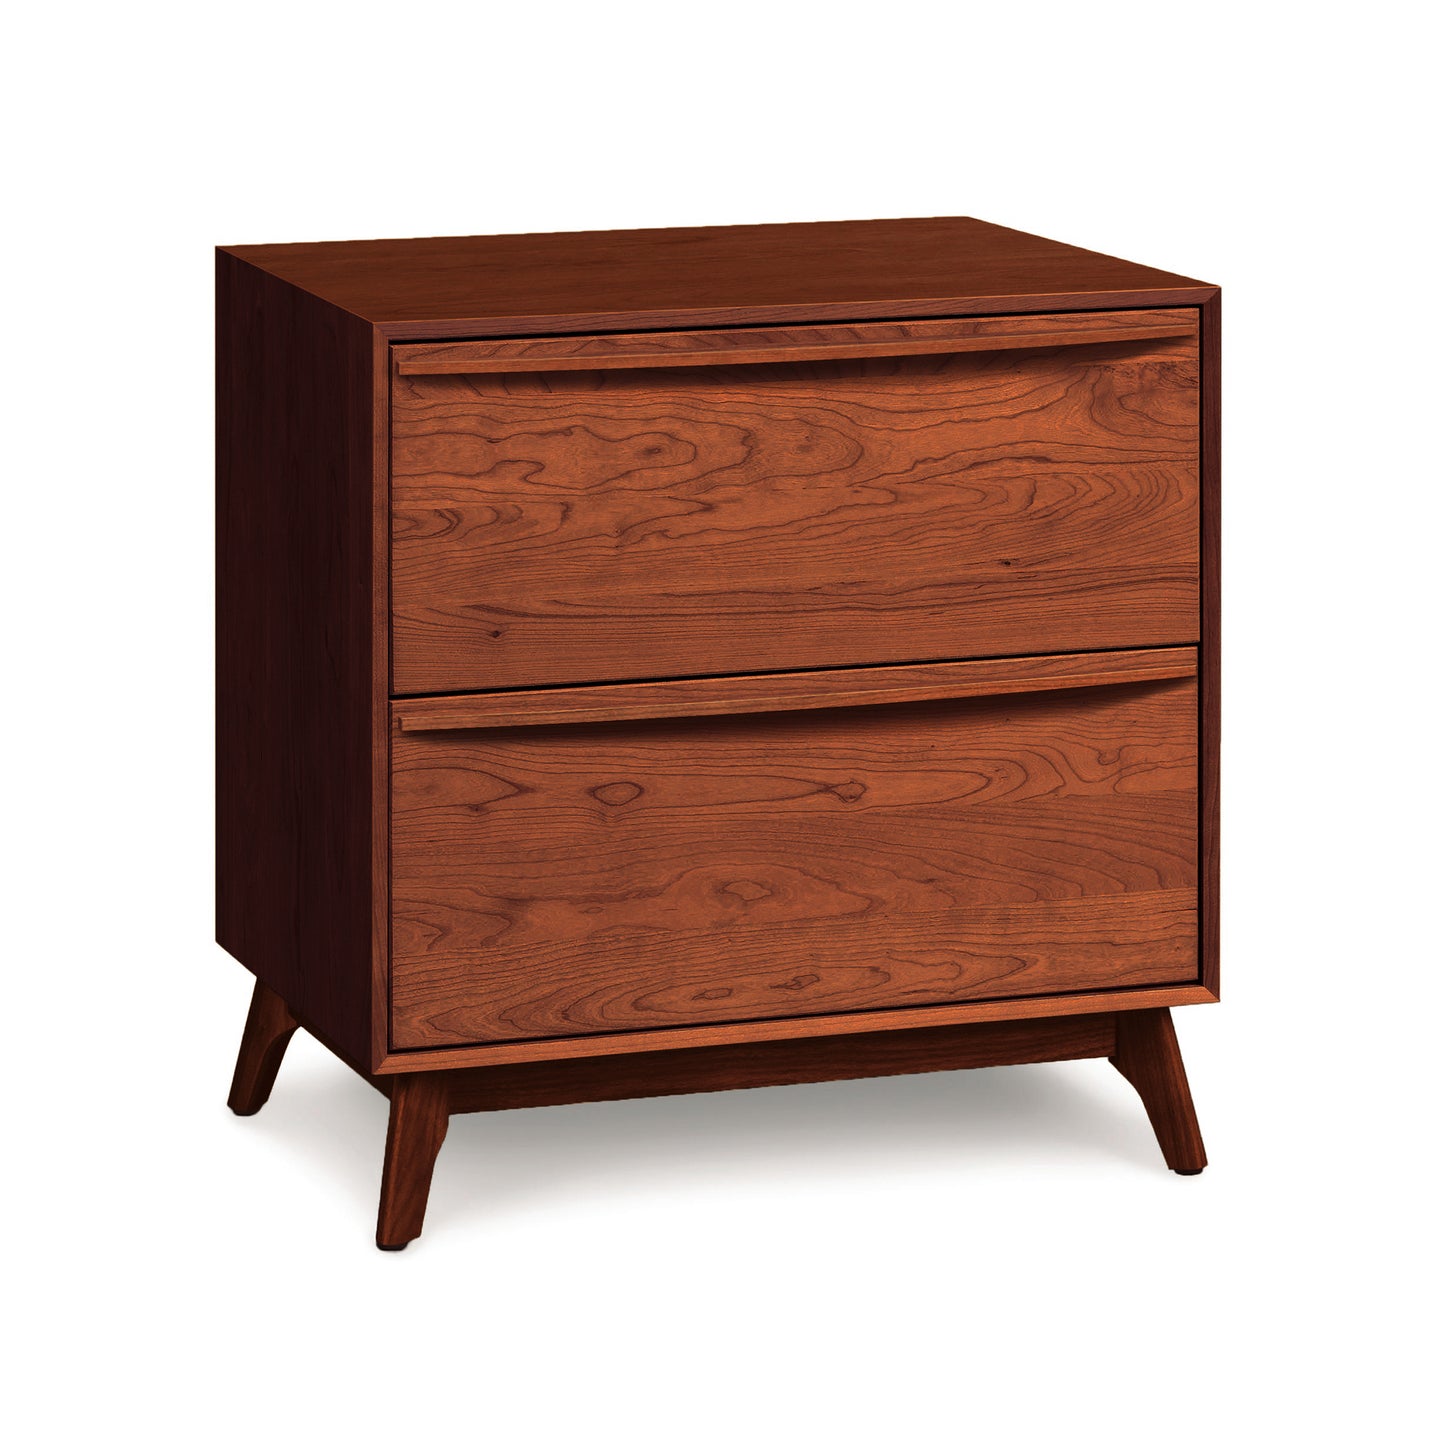 A Copeland Furniture Catalina 2-Drawer Nightstand crafted from solid natural hardwoods, featuring angled legs isolated against a white background.